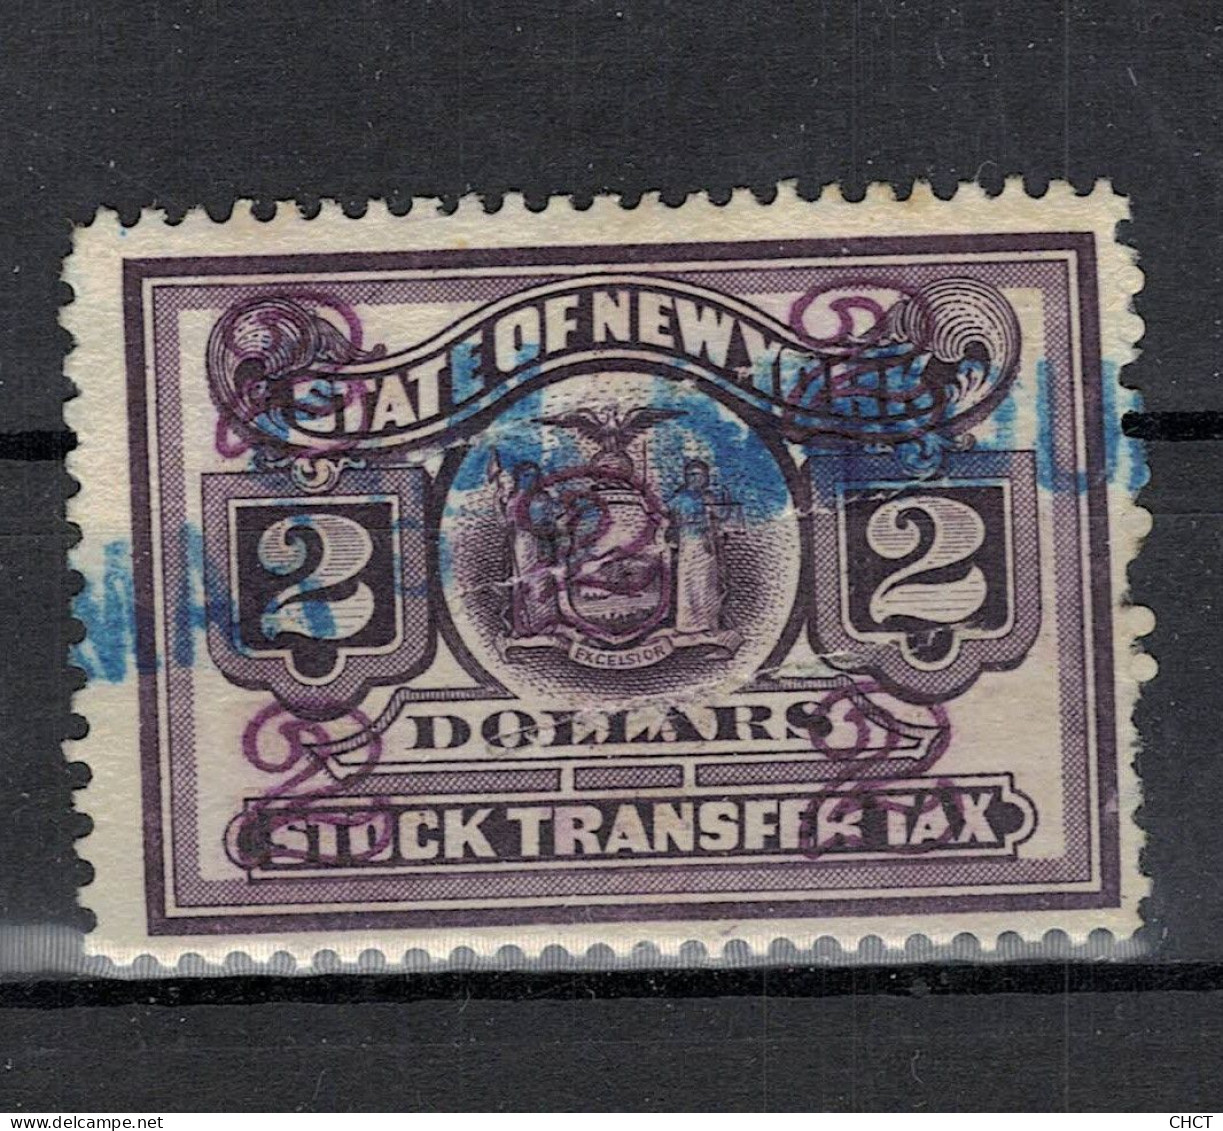 CHCT26 - State Of New York, Stock Transfer Tax Stamp, America - Ohne Zuordnung